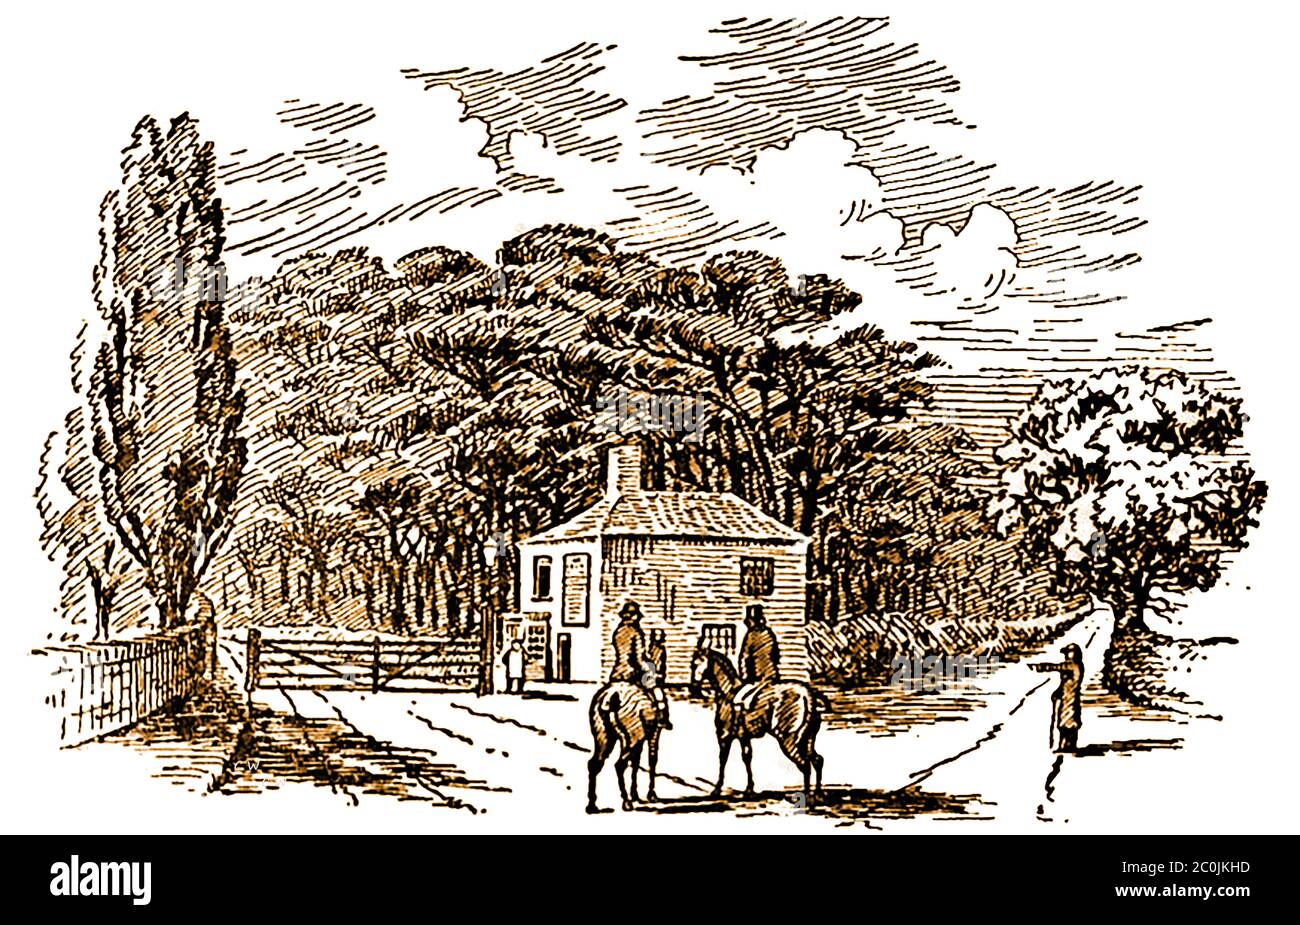 An old sketch of Barnsdale toll bar during the coaching era.the former Barnsdale toll gate or 'bar', which was situated at the junction between the Great North Road  (York to Edinbrough) and the Pontefract Road during the era of horse-drawn coaches, before the growth of the railways Stock Photo